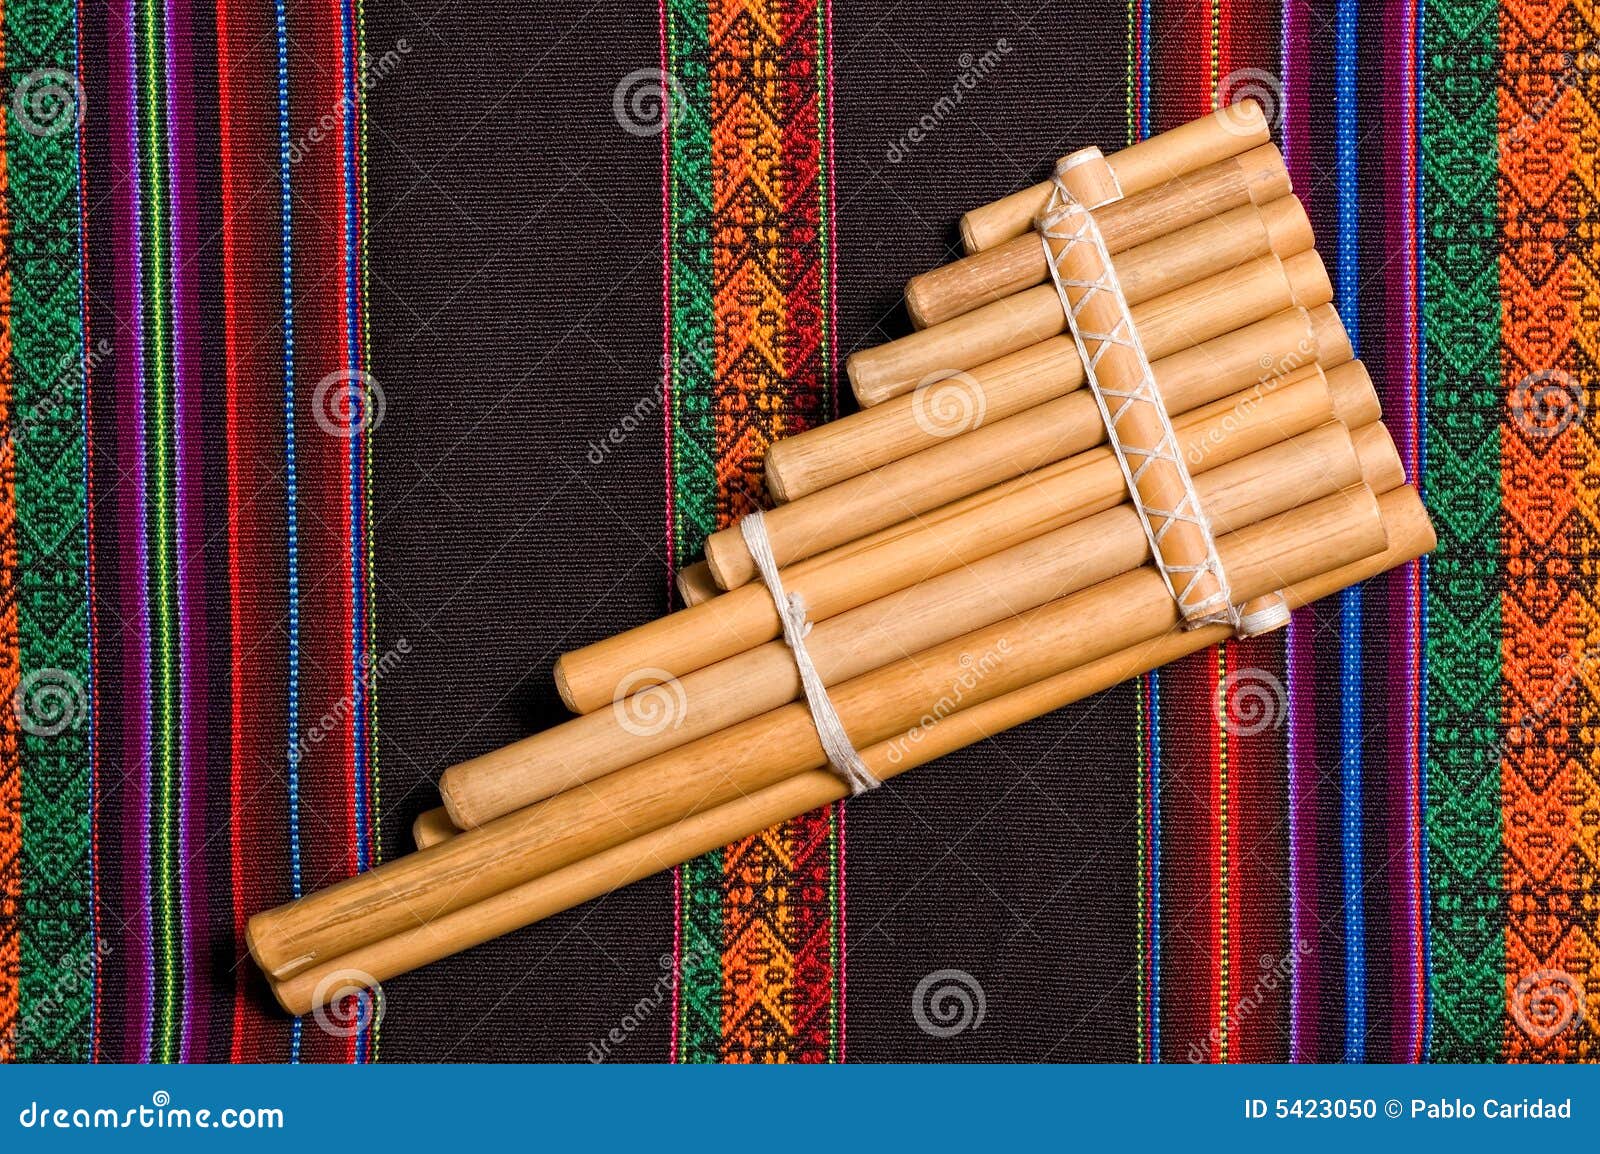 andean wind musical instrument